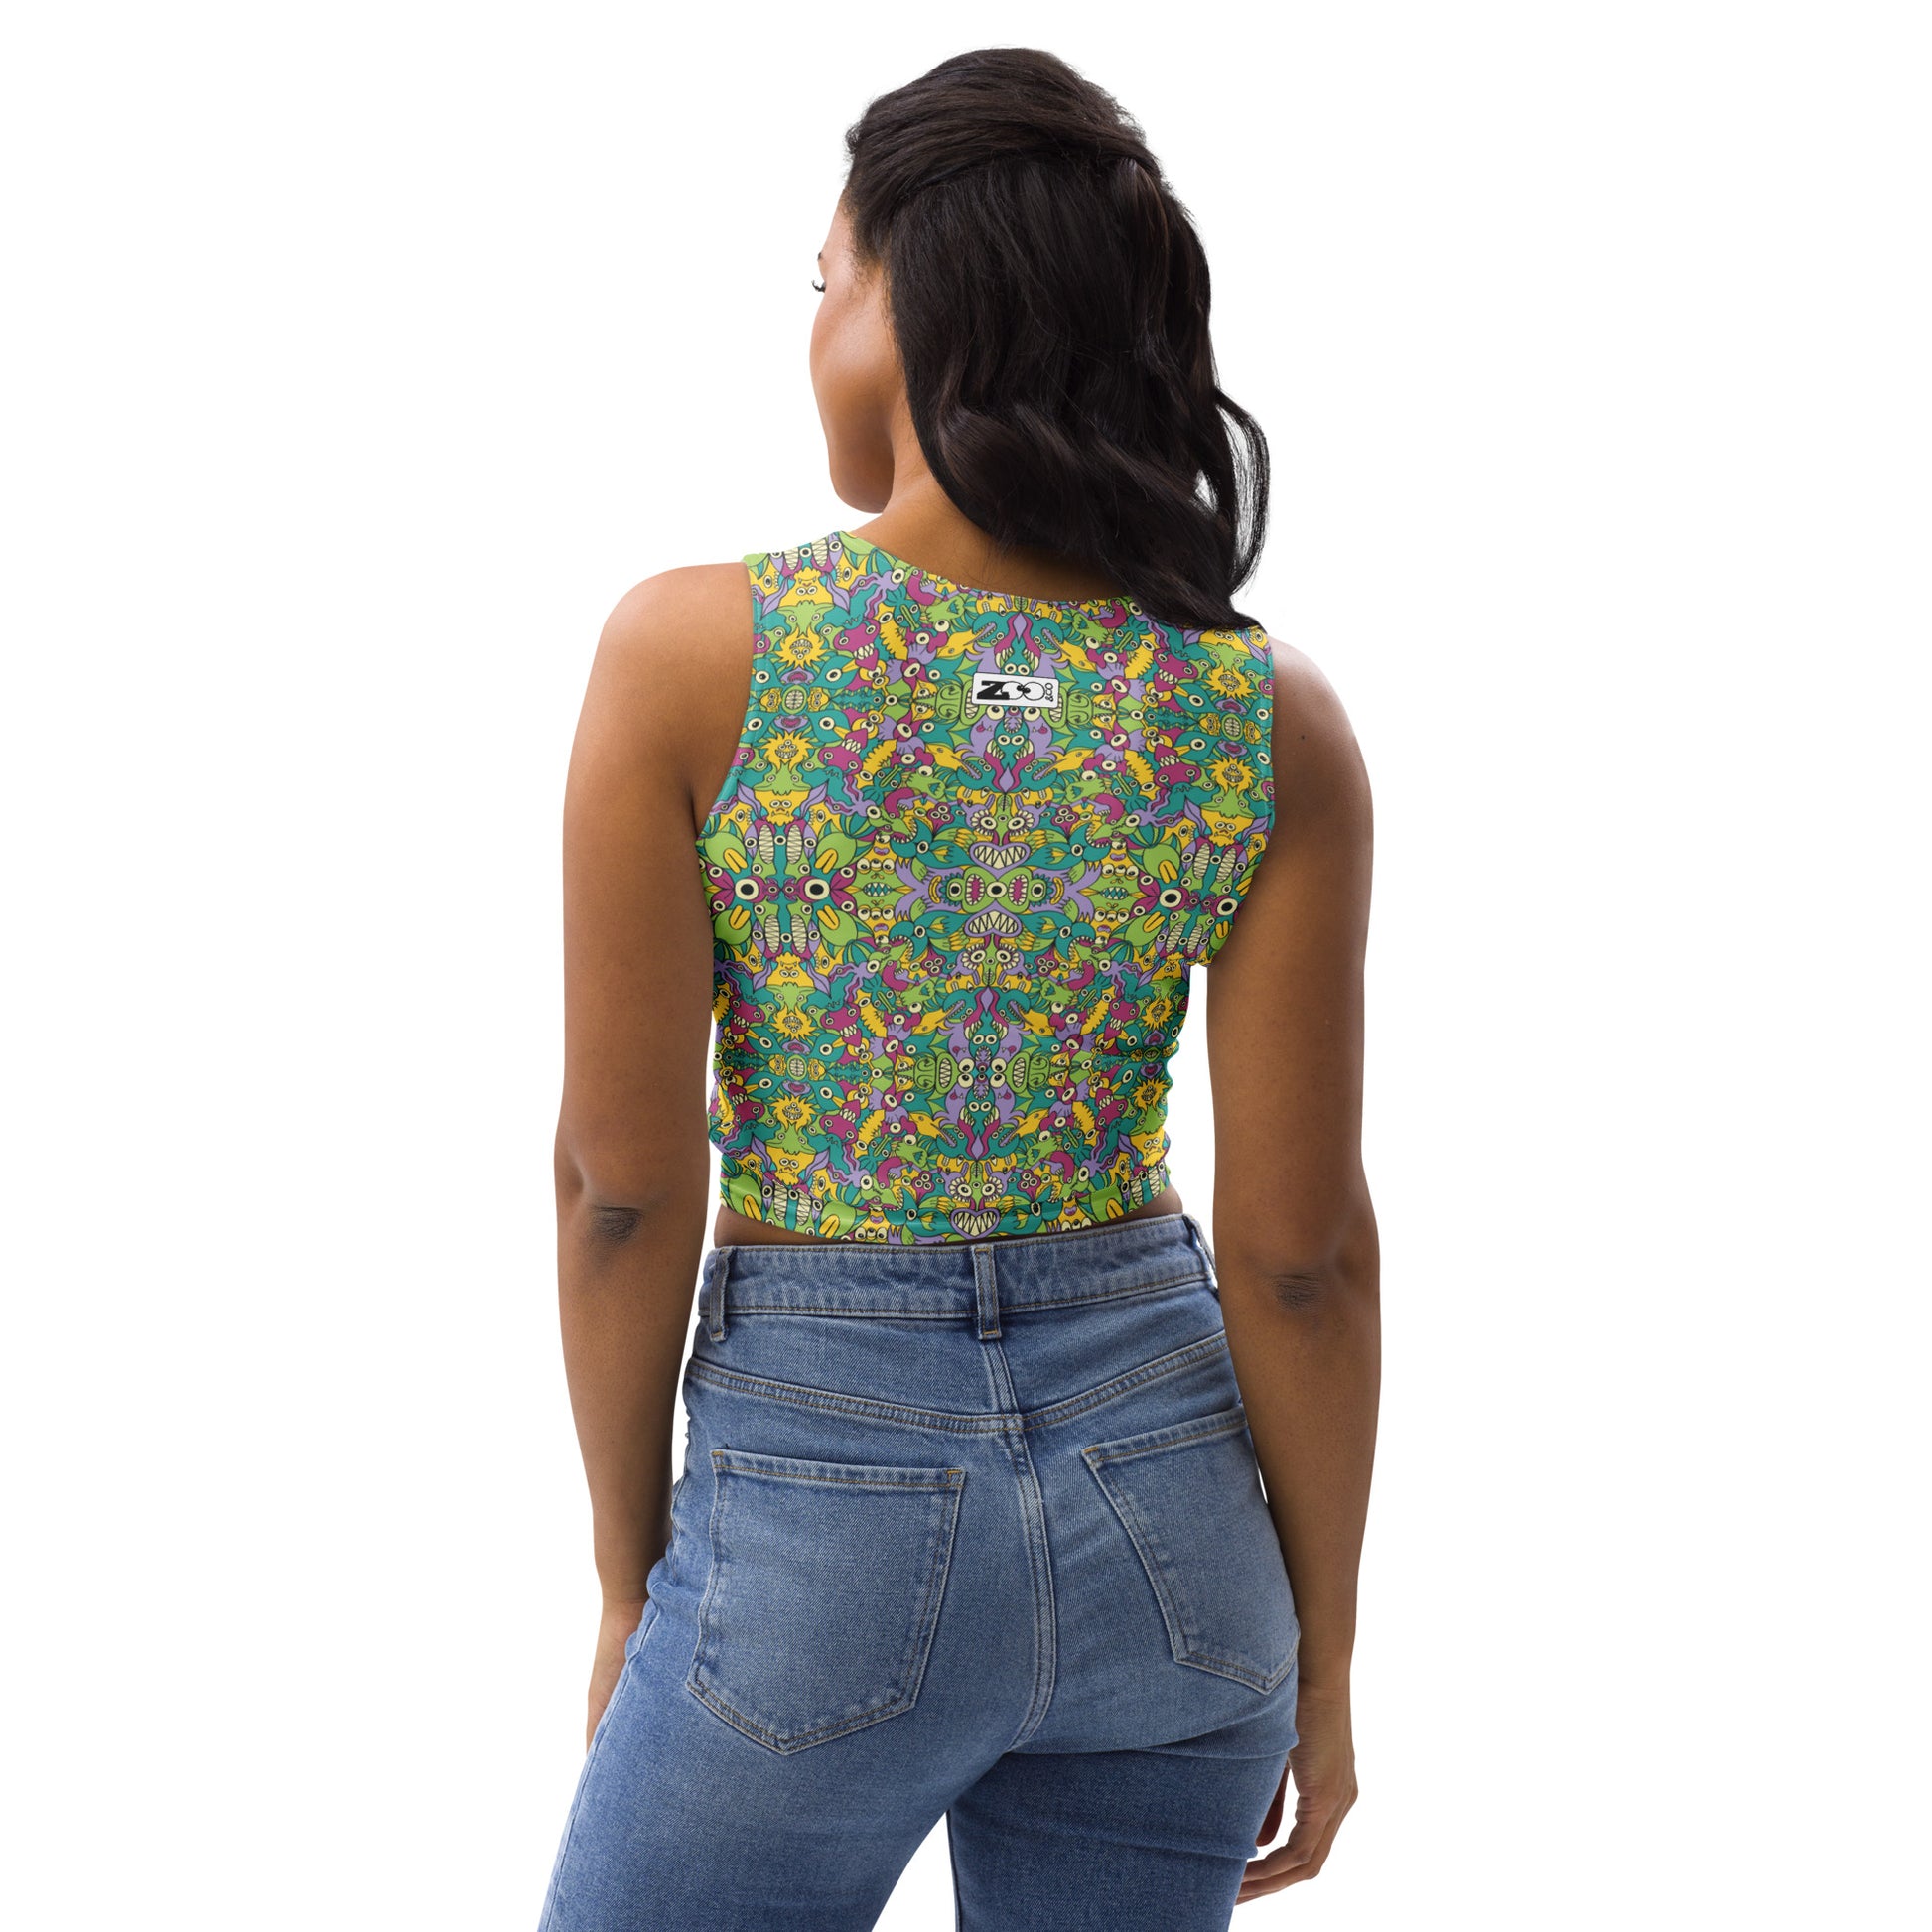 It’s life but not as we know it pattern design Crop Top. Back view